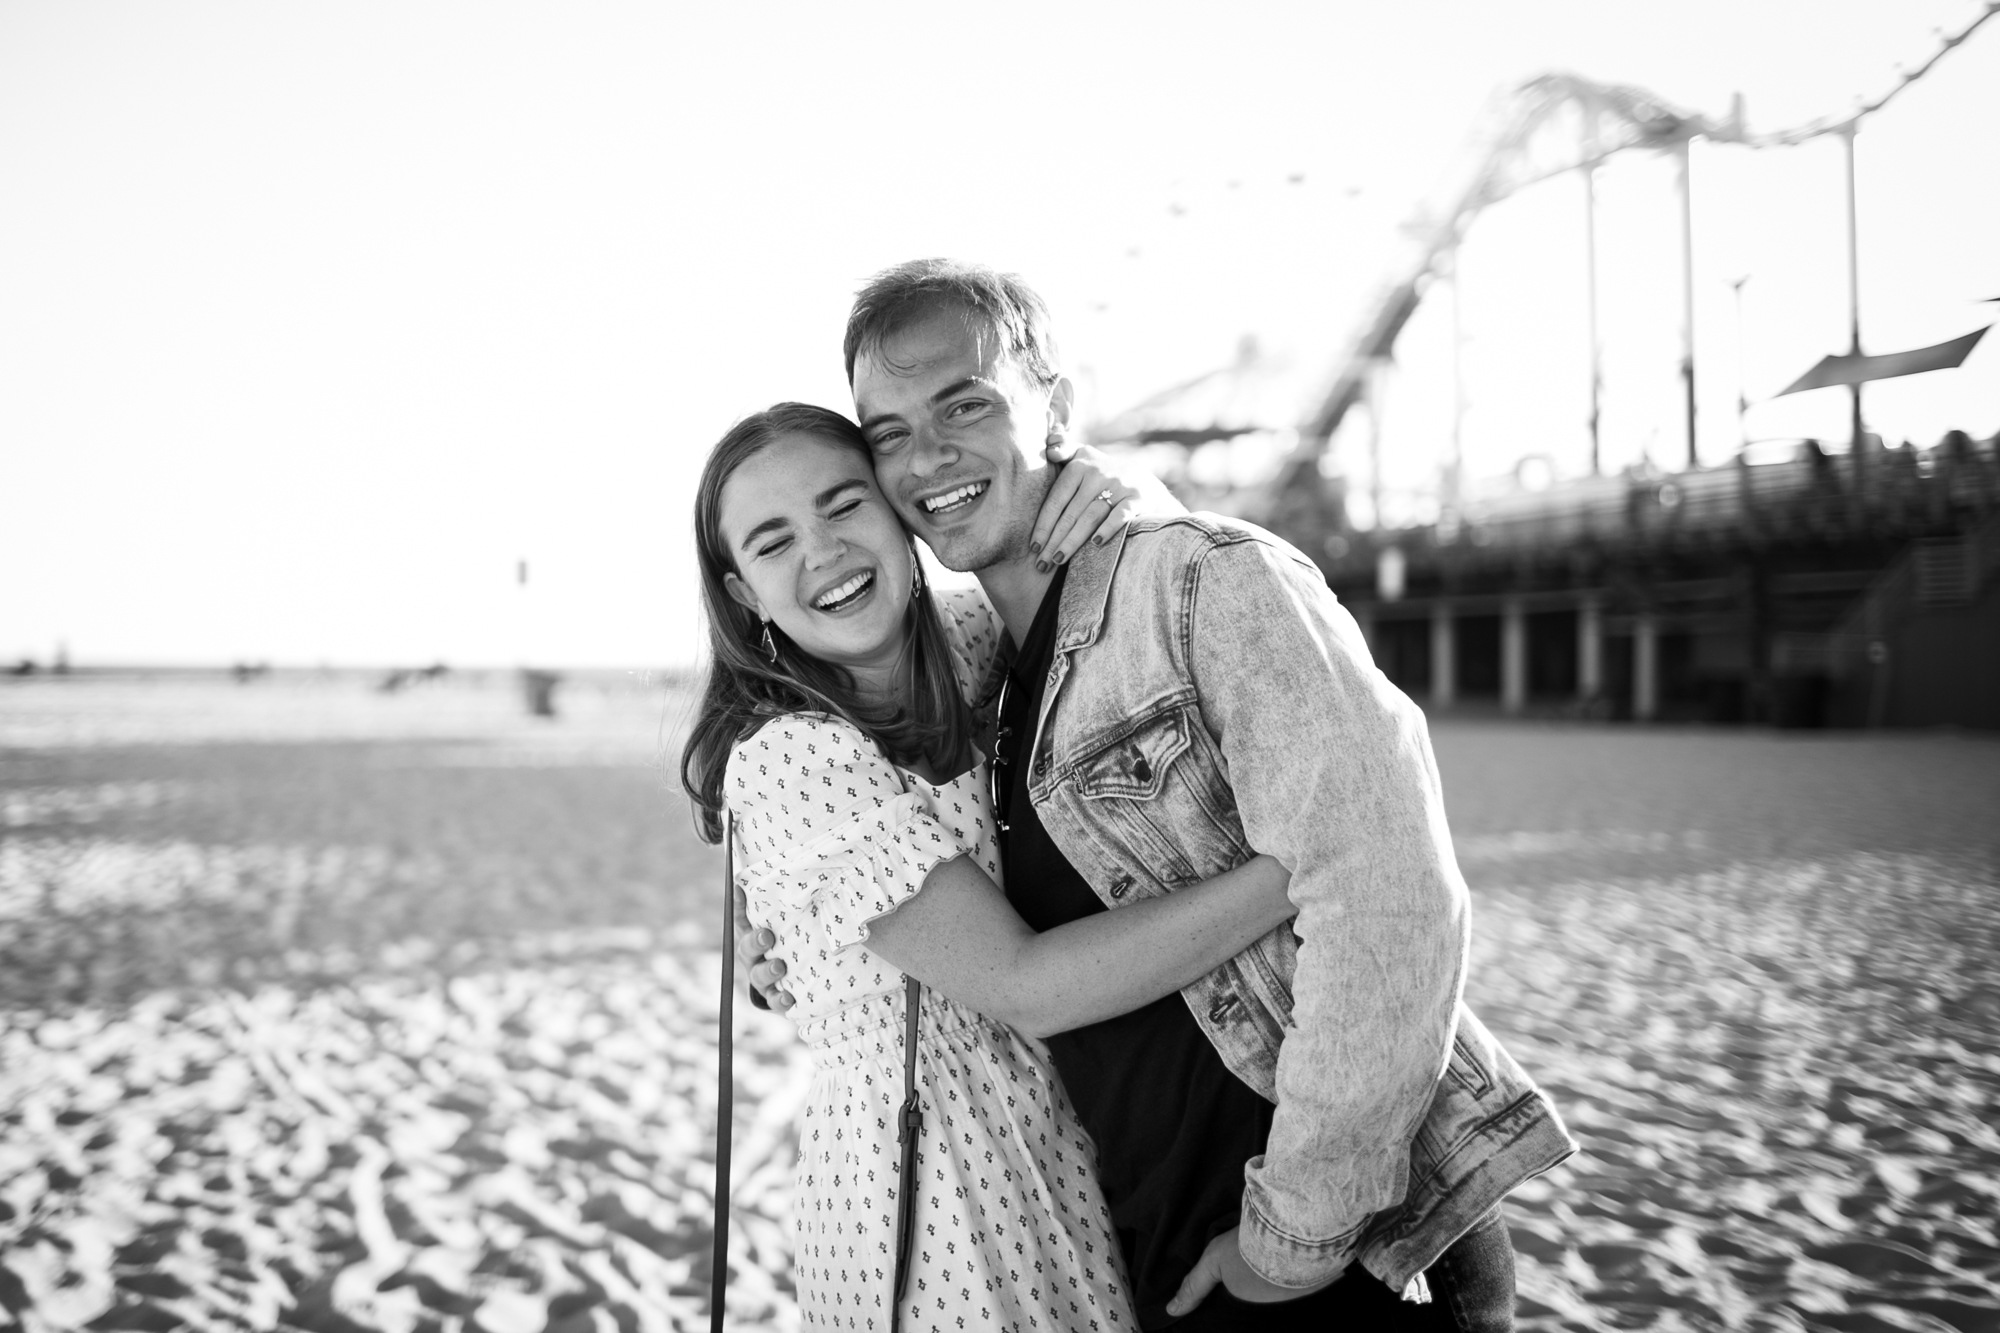 Proposal Photographer in Los Angeles at the Santa Monica Pier